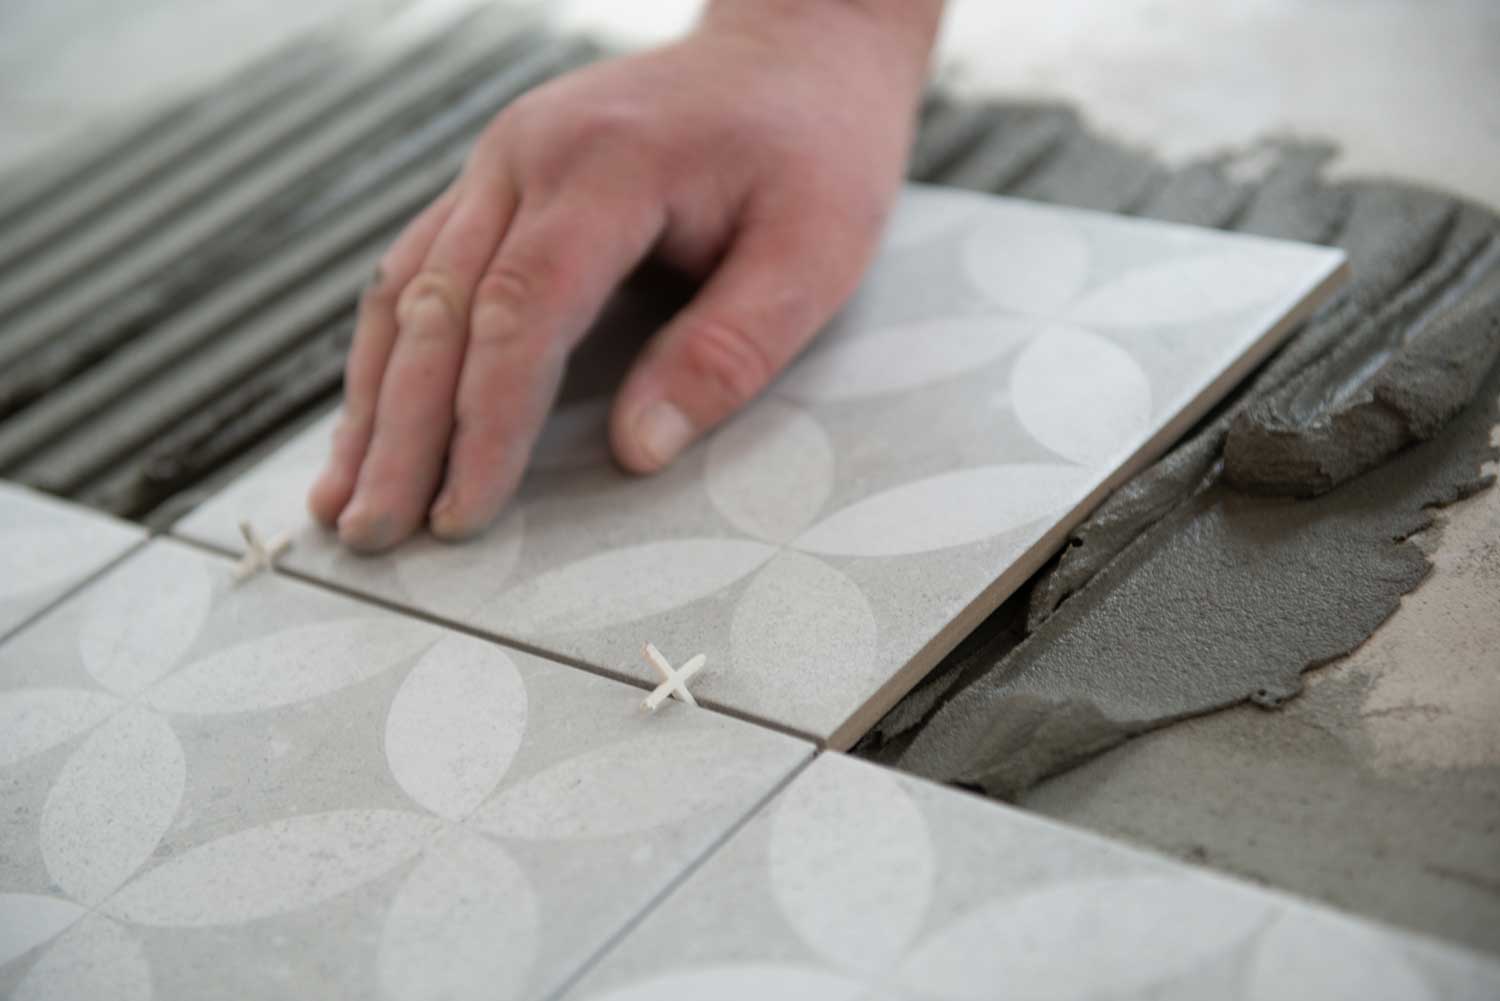 Seal your tile grout lines to keep beautiful tile floors - tips from Footprints Floors.